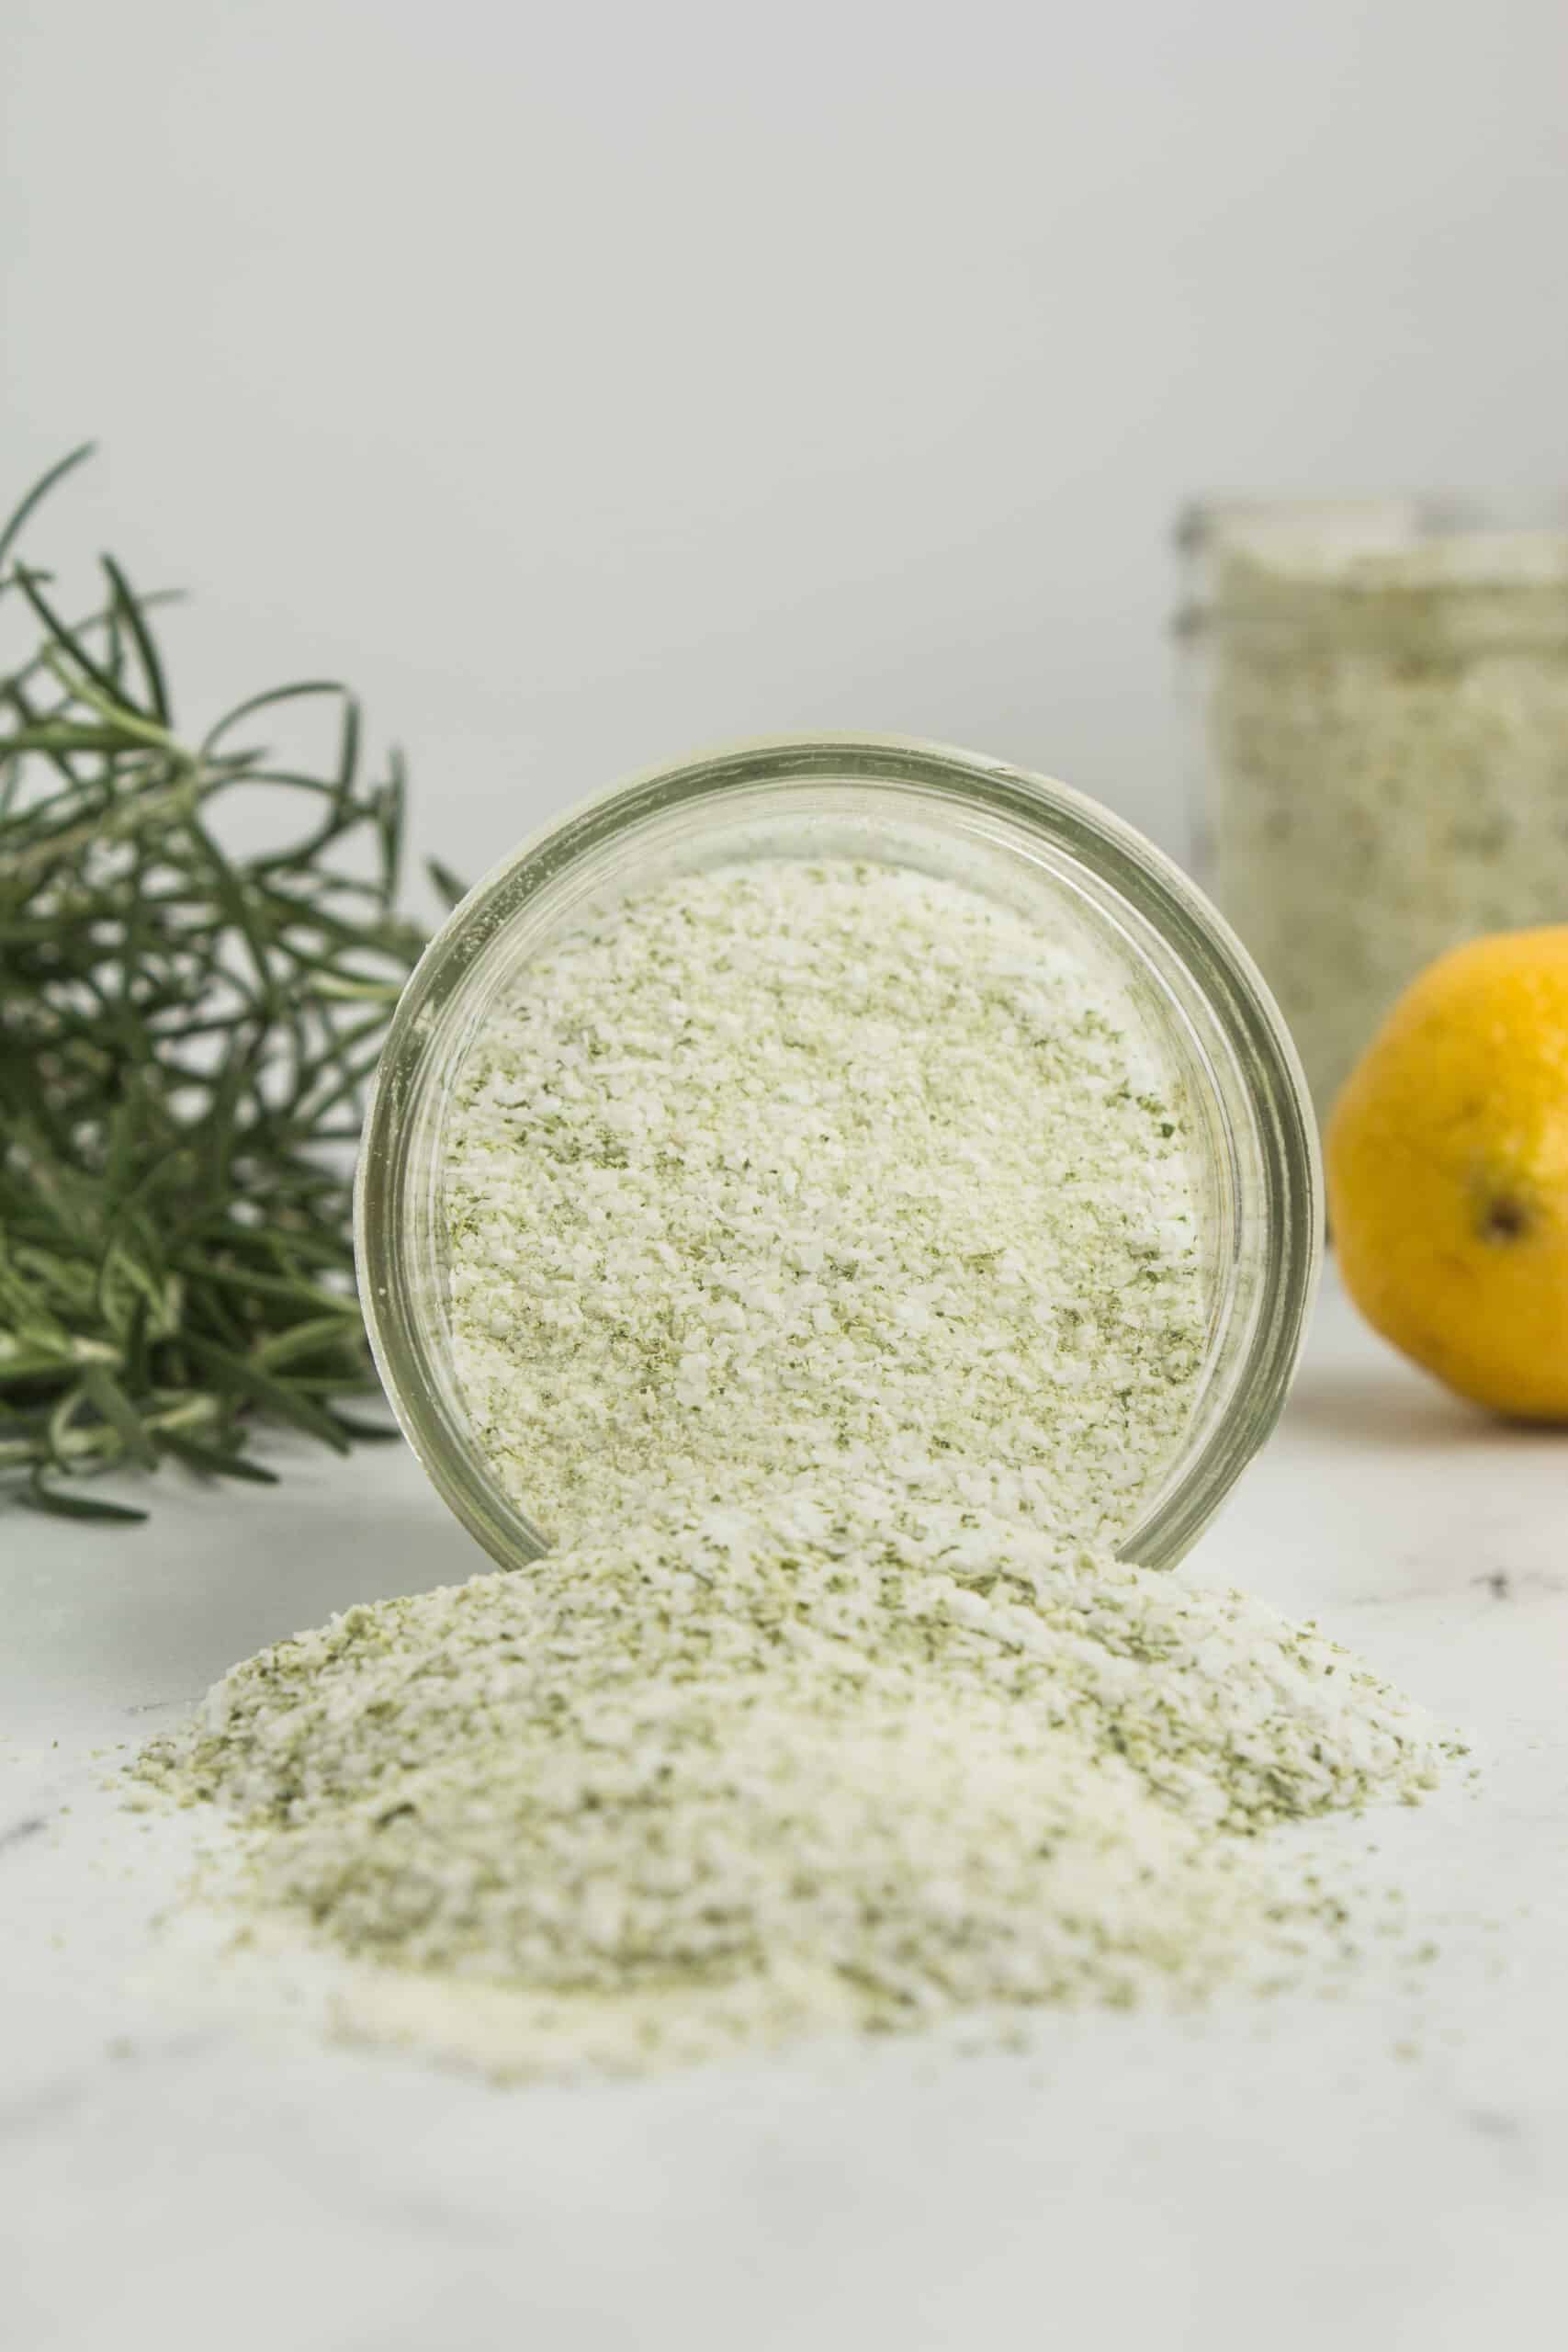 The image portrays a tipped-over mason jar with a heap of freshly made rosemary salt spilled in front of it. The rosemary salt is a flavorful blend, combining the aromatic essence of rosemary with salt.